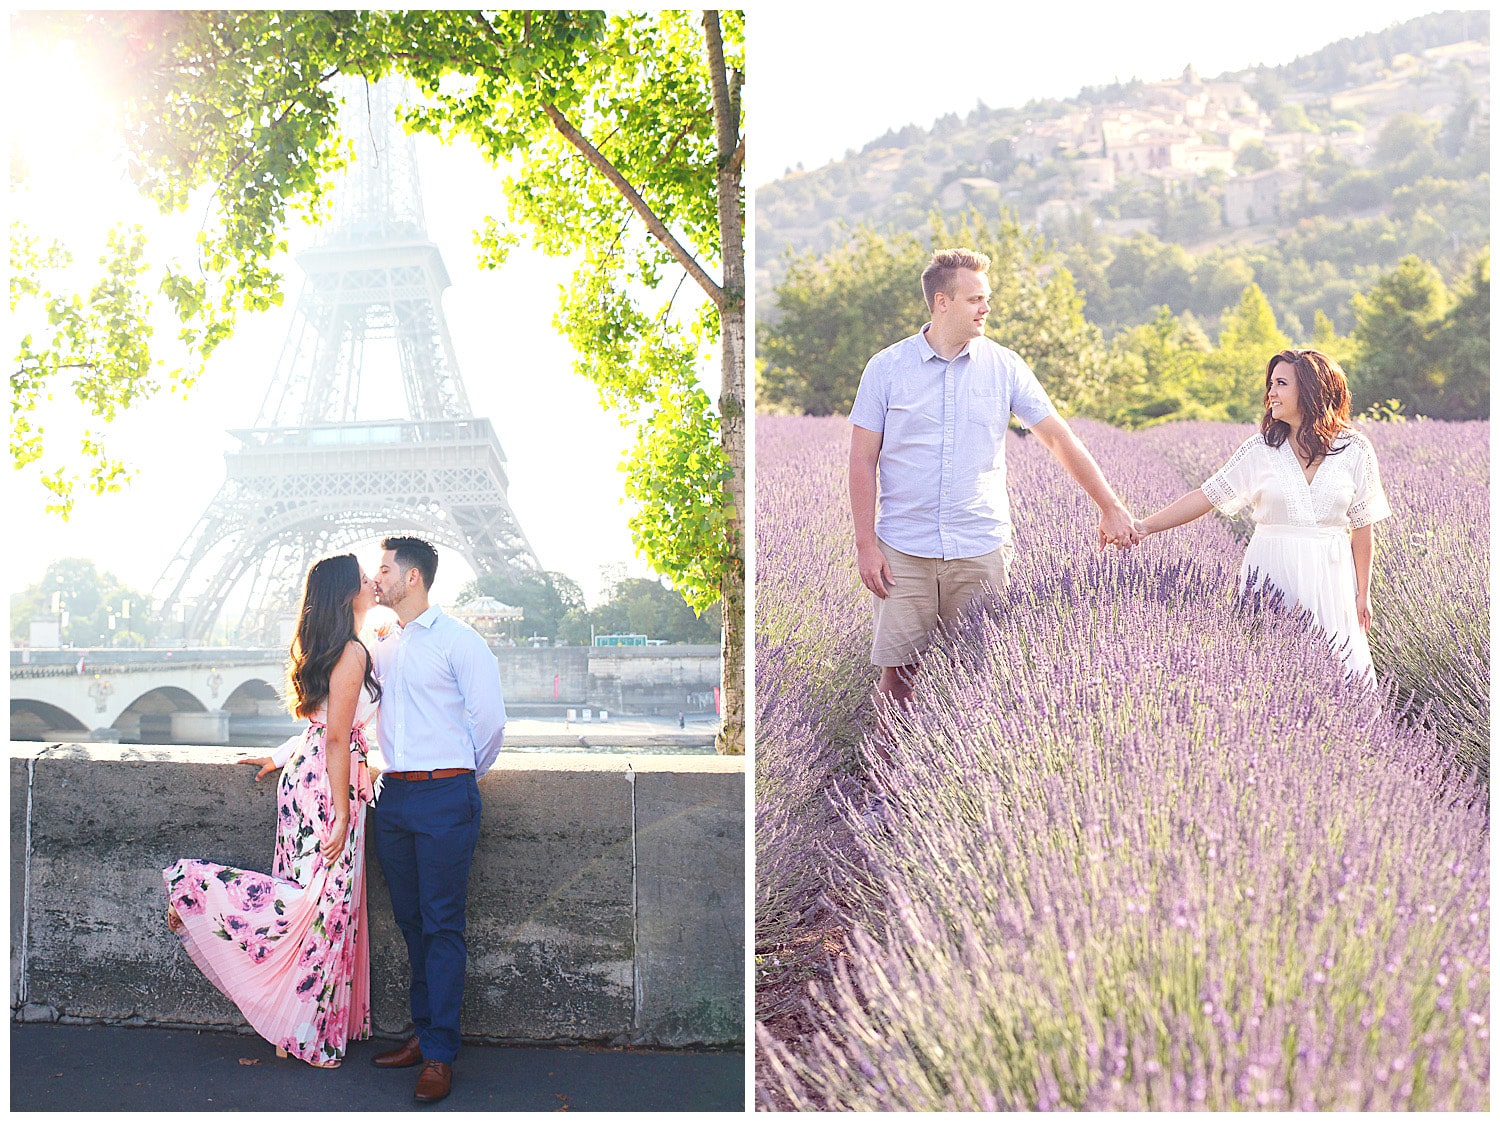 Marie-Calfopoulos-photographer-Provence-Luberon-Avignon-couple-engagement-love-photo-session_0001